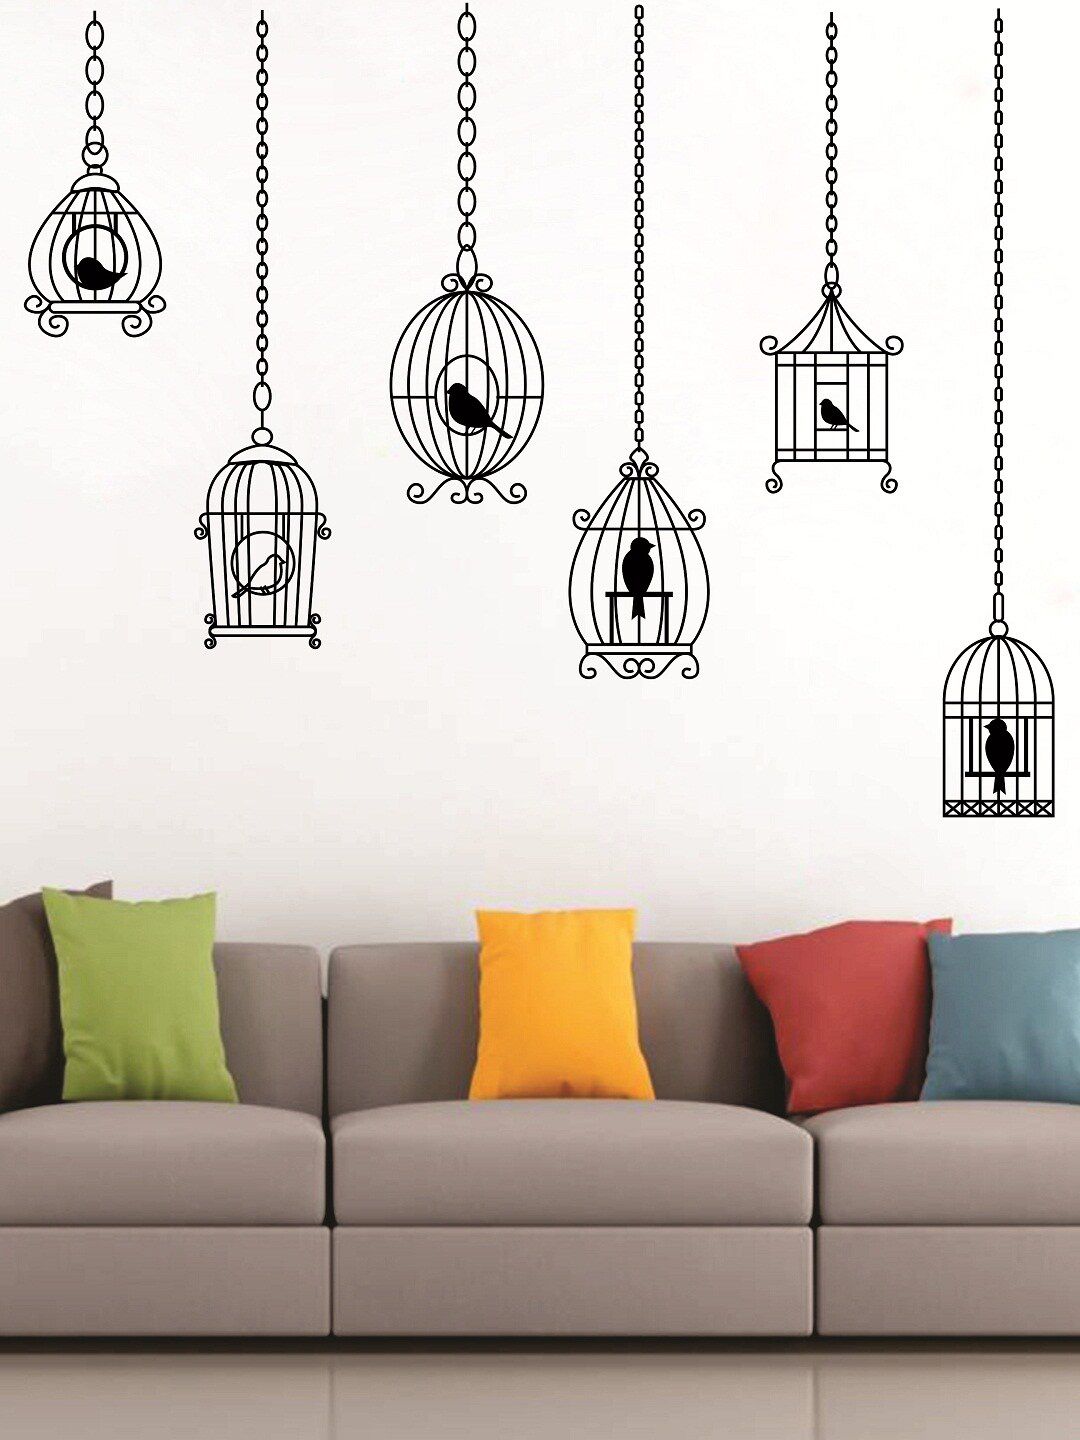 WALLSTICK Black Bird Cages Large Vinyl Wall Sticker Price in India